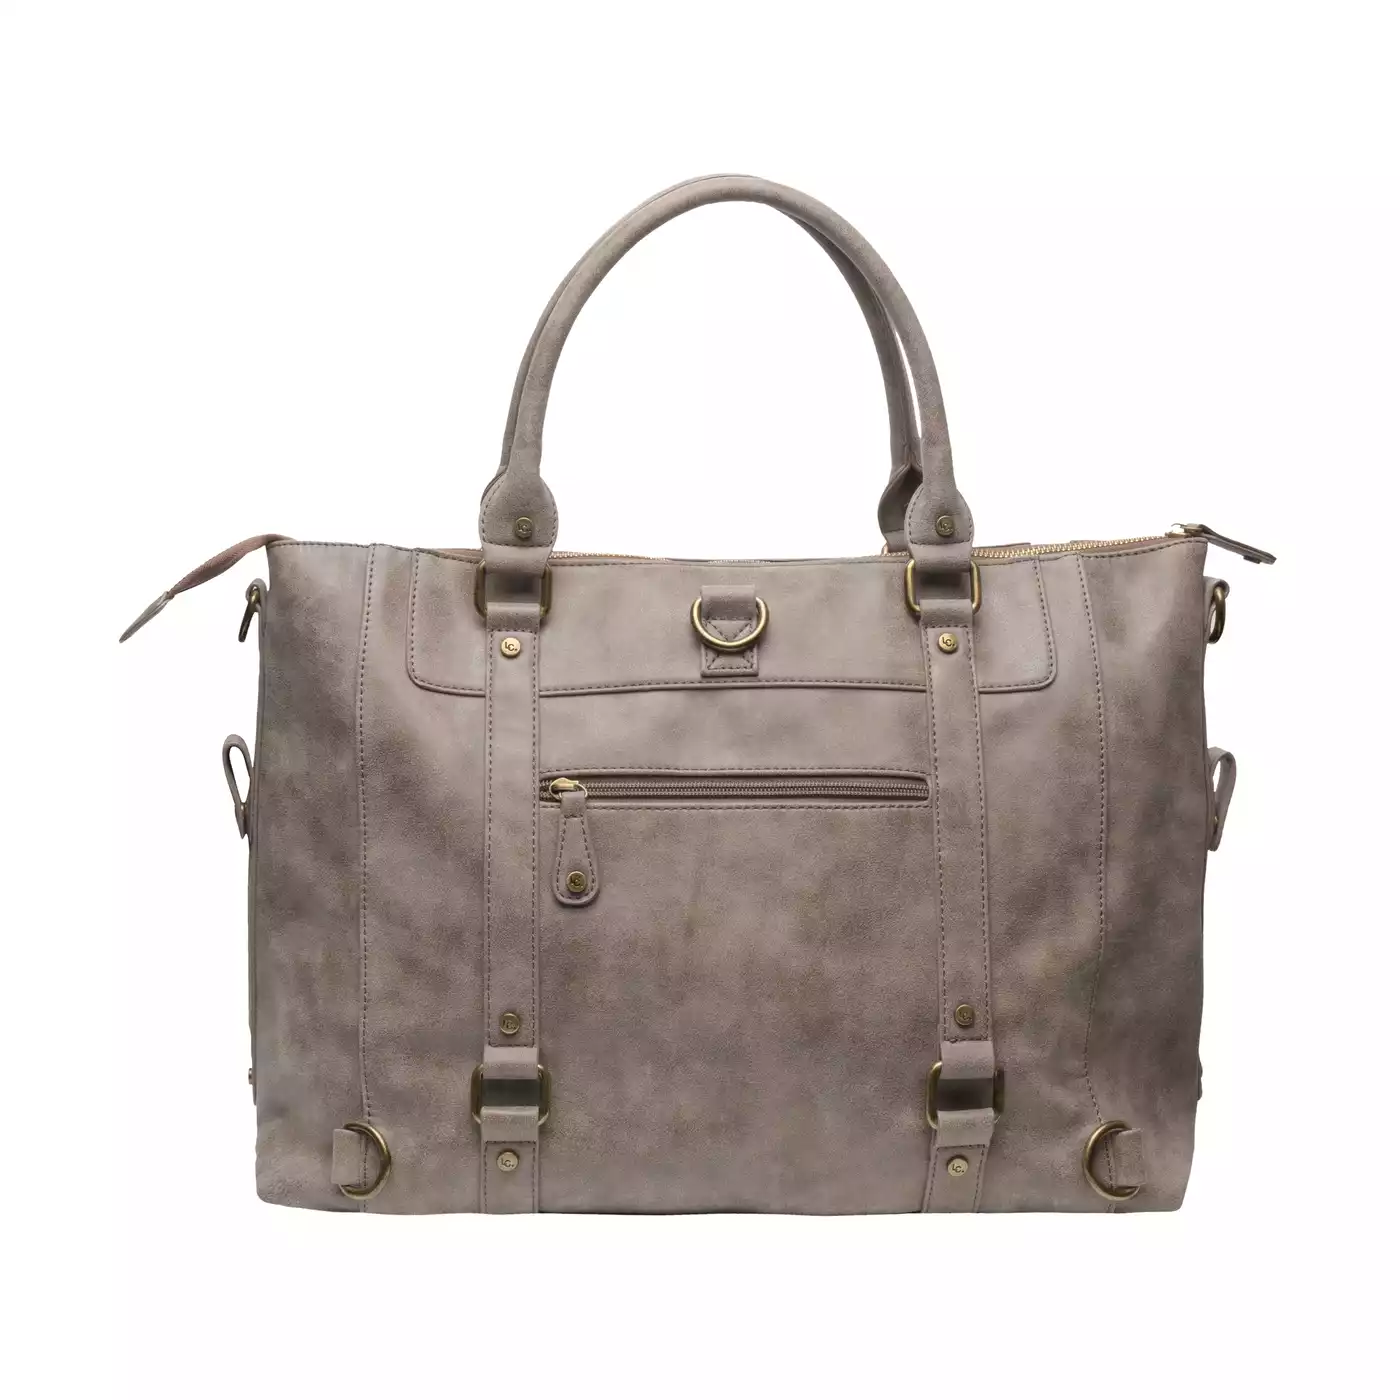 Wickeltasche Helsinki solid taupe Little Company Beige Taupe 2000576181309 9